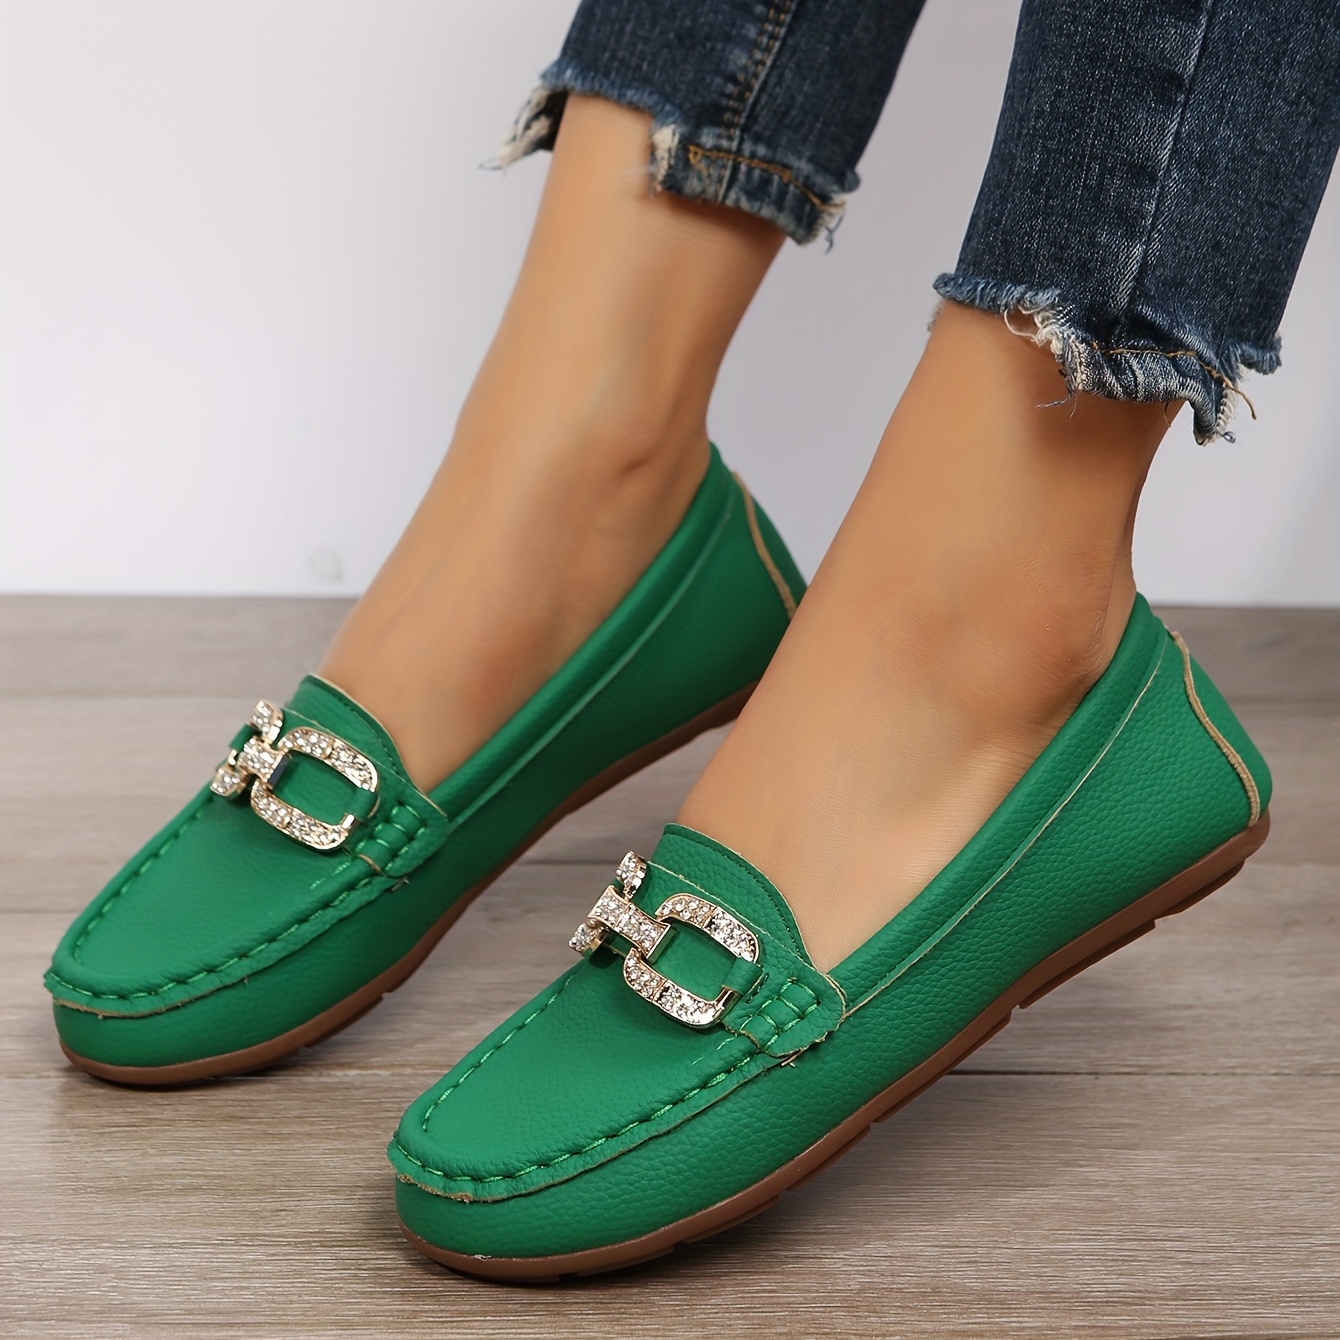 New Tod's Dee Laccetto Dark Green Ballerina Flats Shoes With Front Ties  Size 39 | eBay